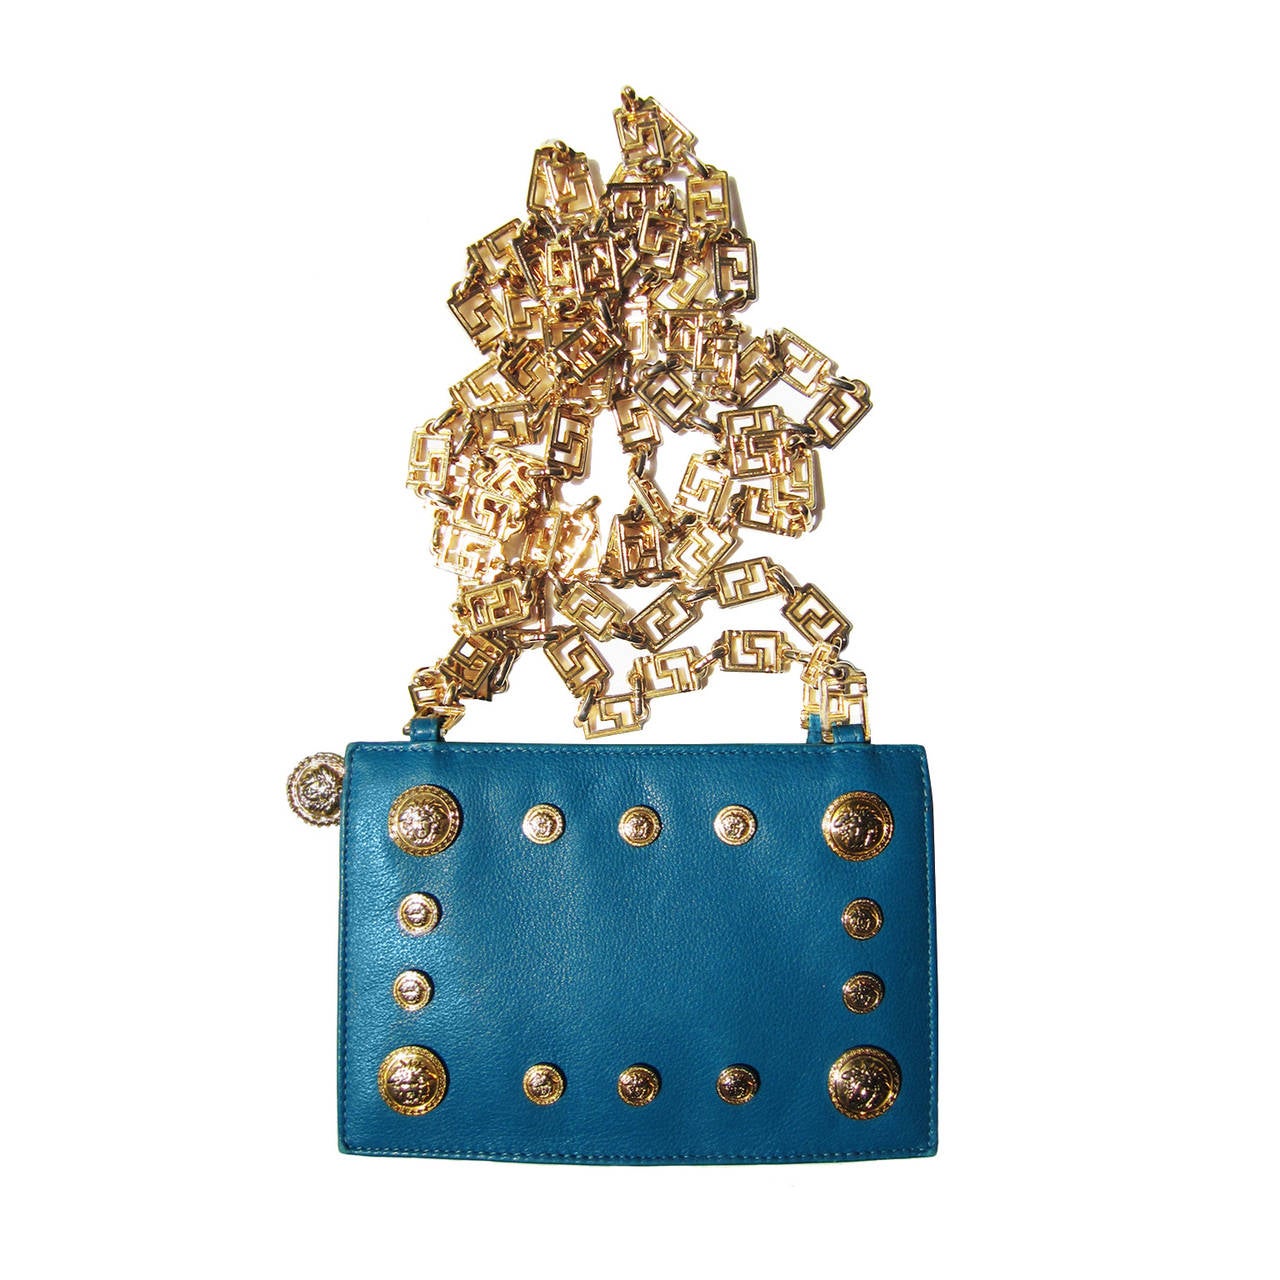 Gianni Versace Couture bright turquoise chain purse with gold medusa.
Sz : 11,5 x 17 x 4,5 cm
Total length shoulder chain 116 cm